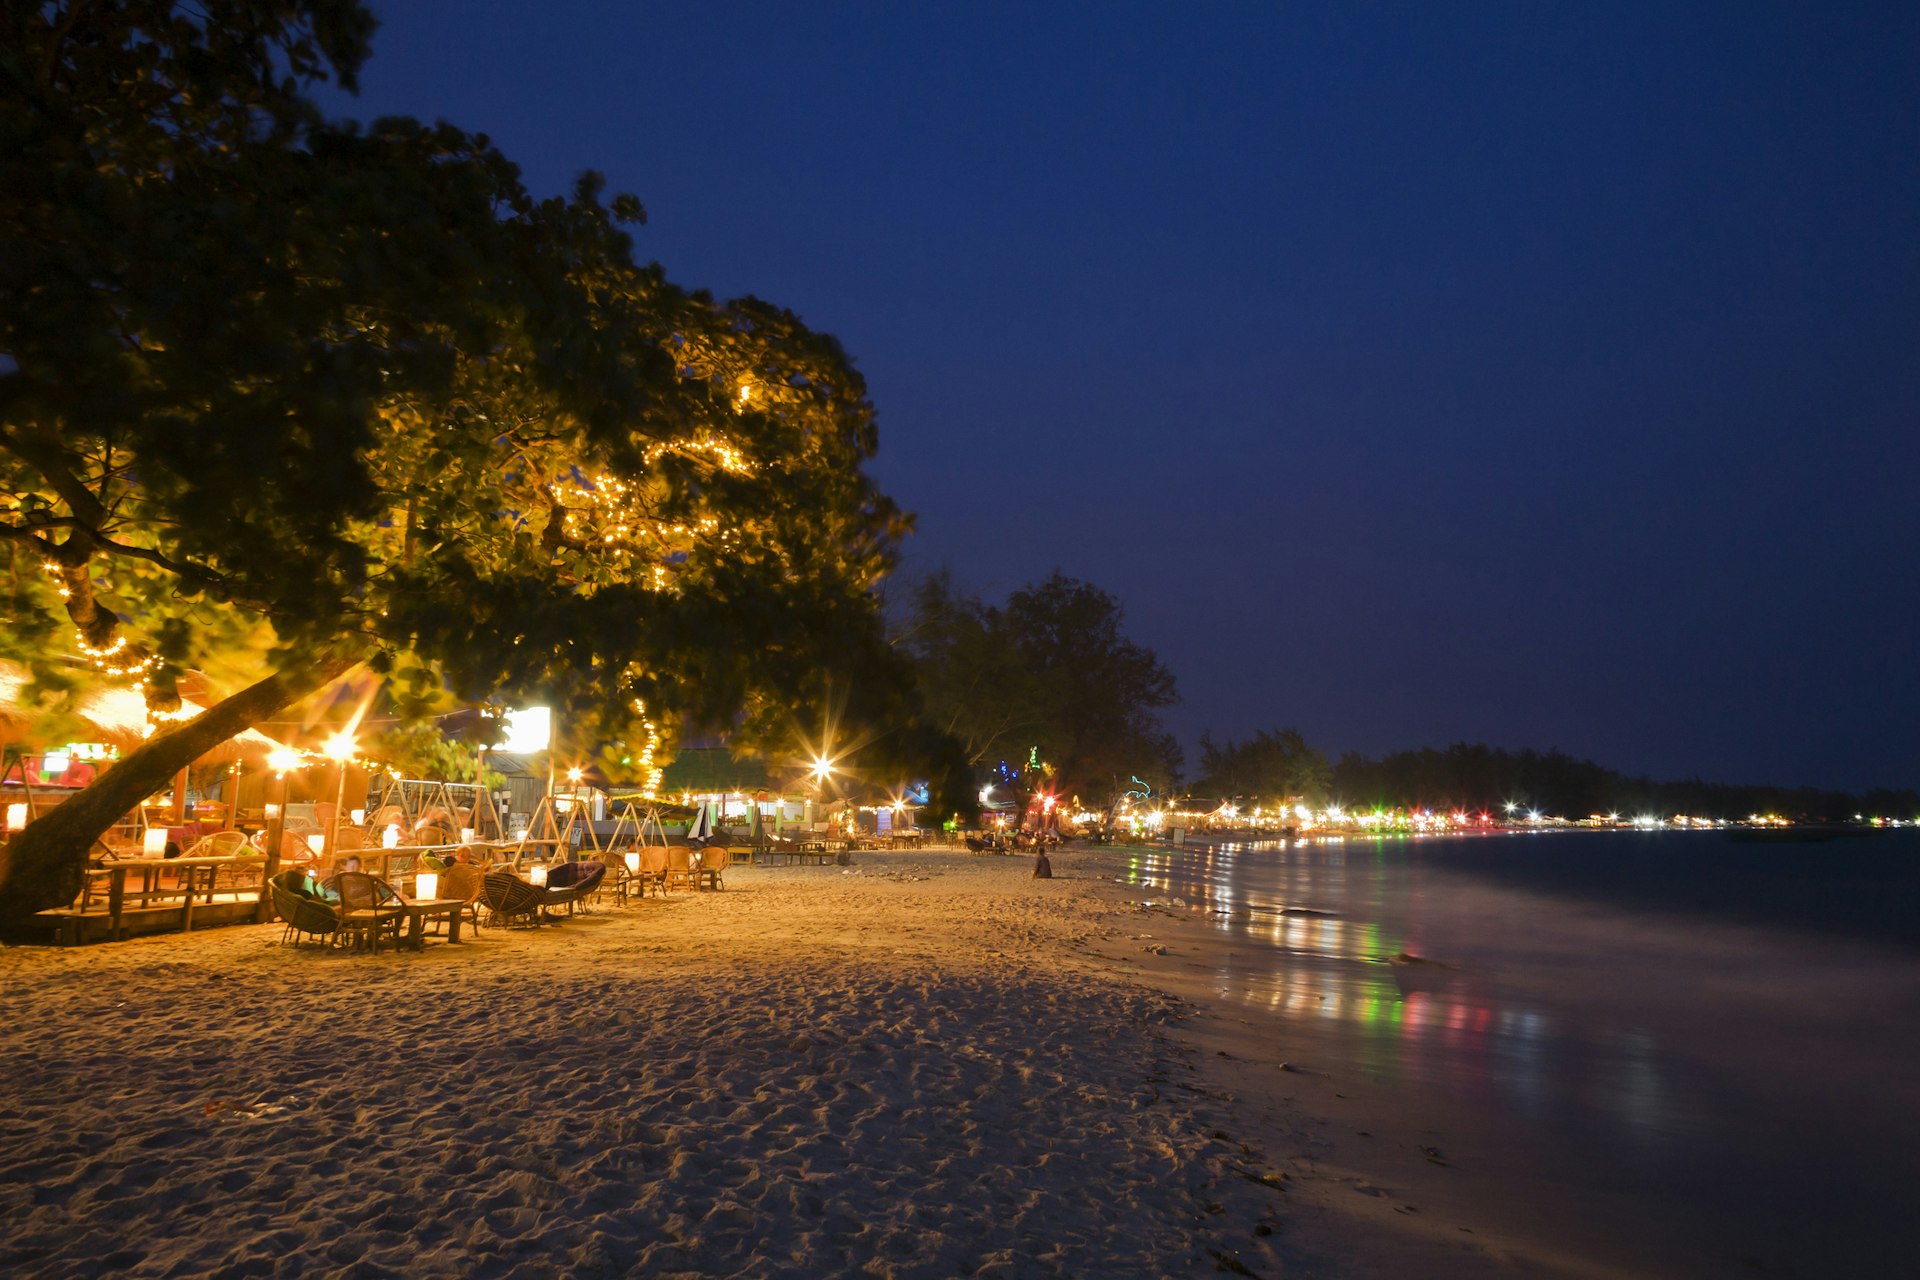 An empty sandy beach at night, lit by the lights from beachside bars.